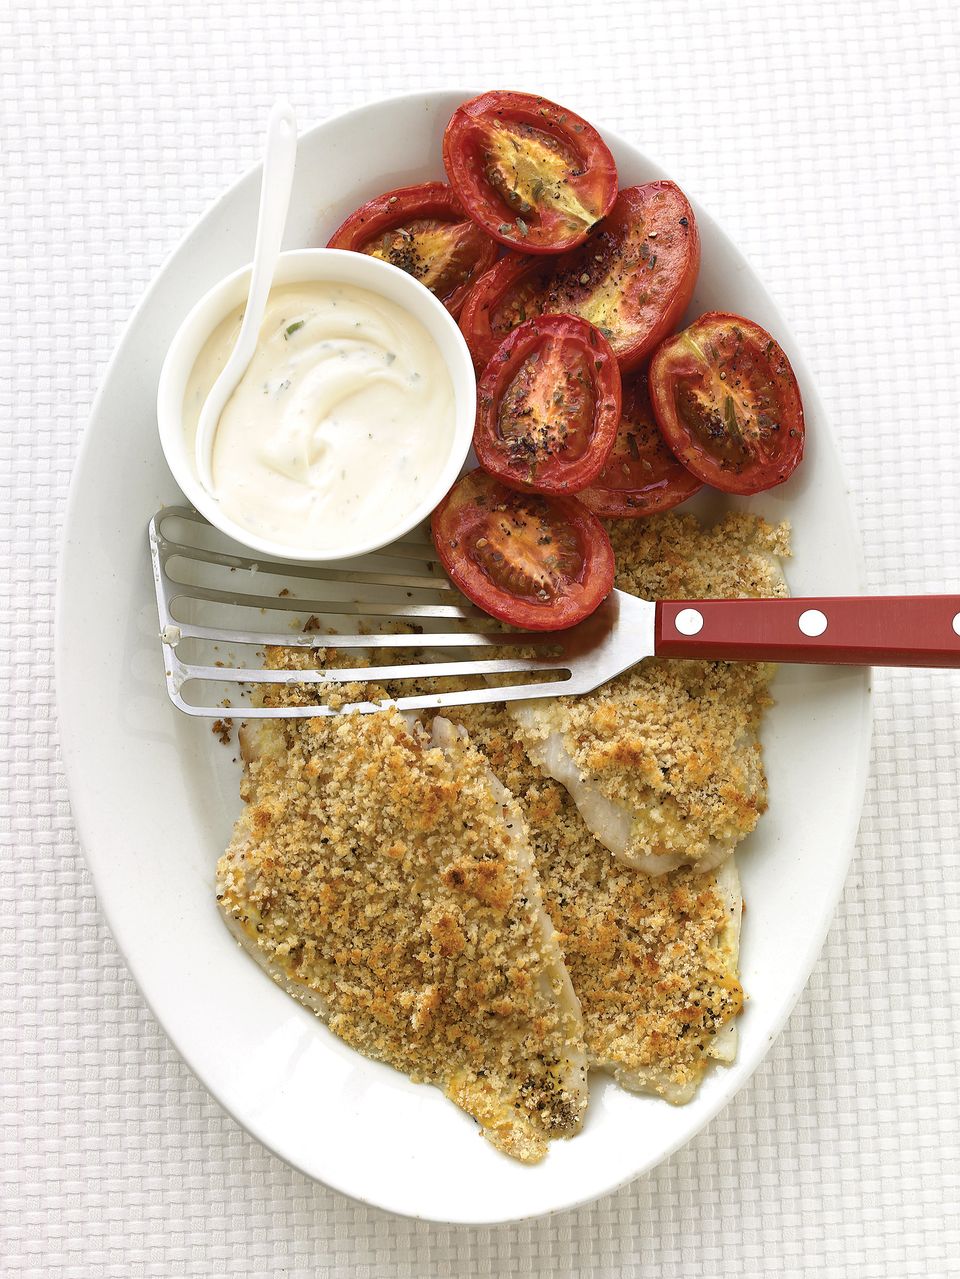 Baked Flounder with Roasted Tomatoes